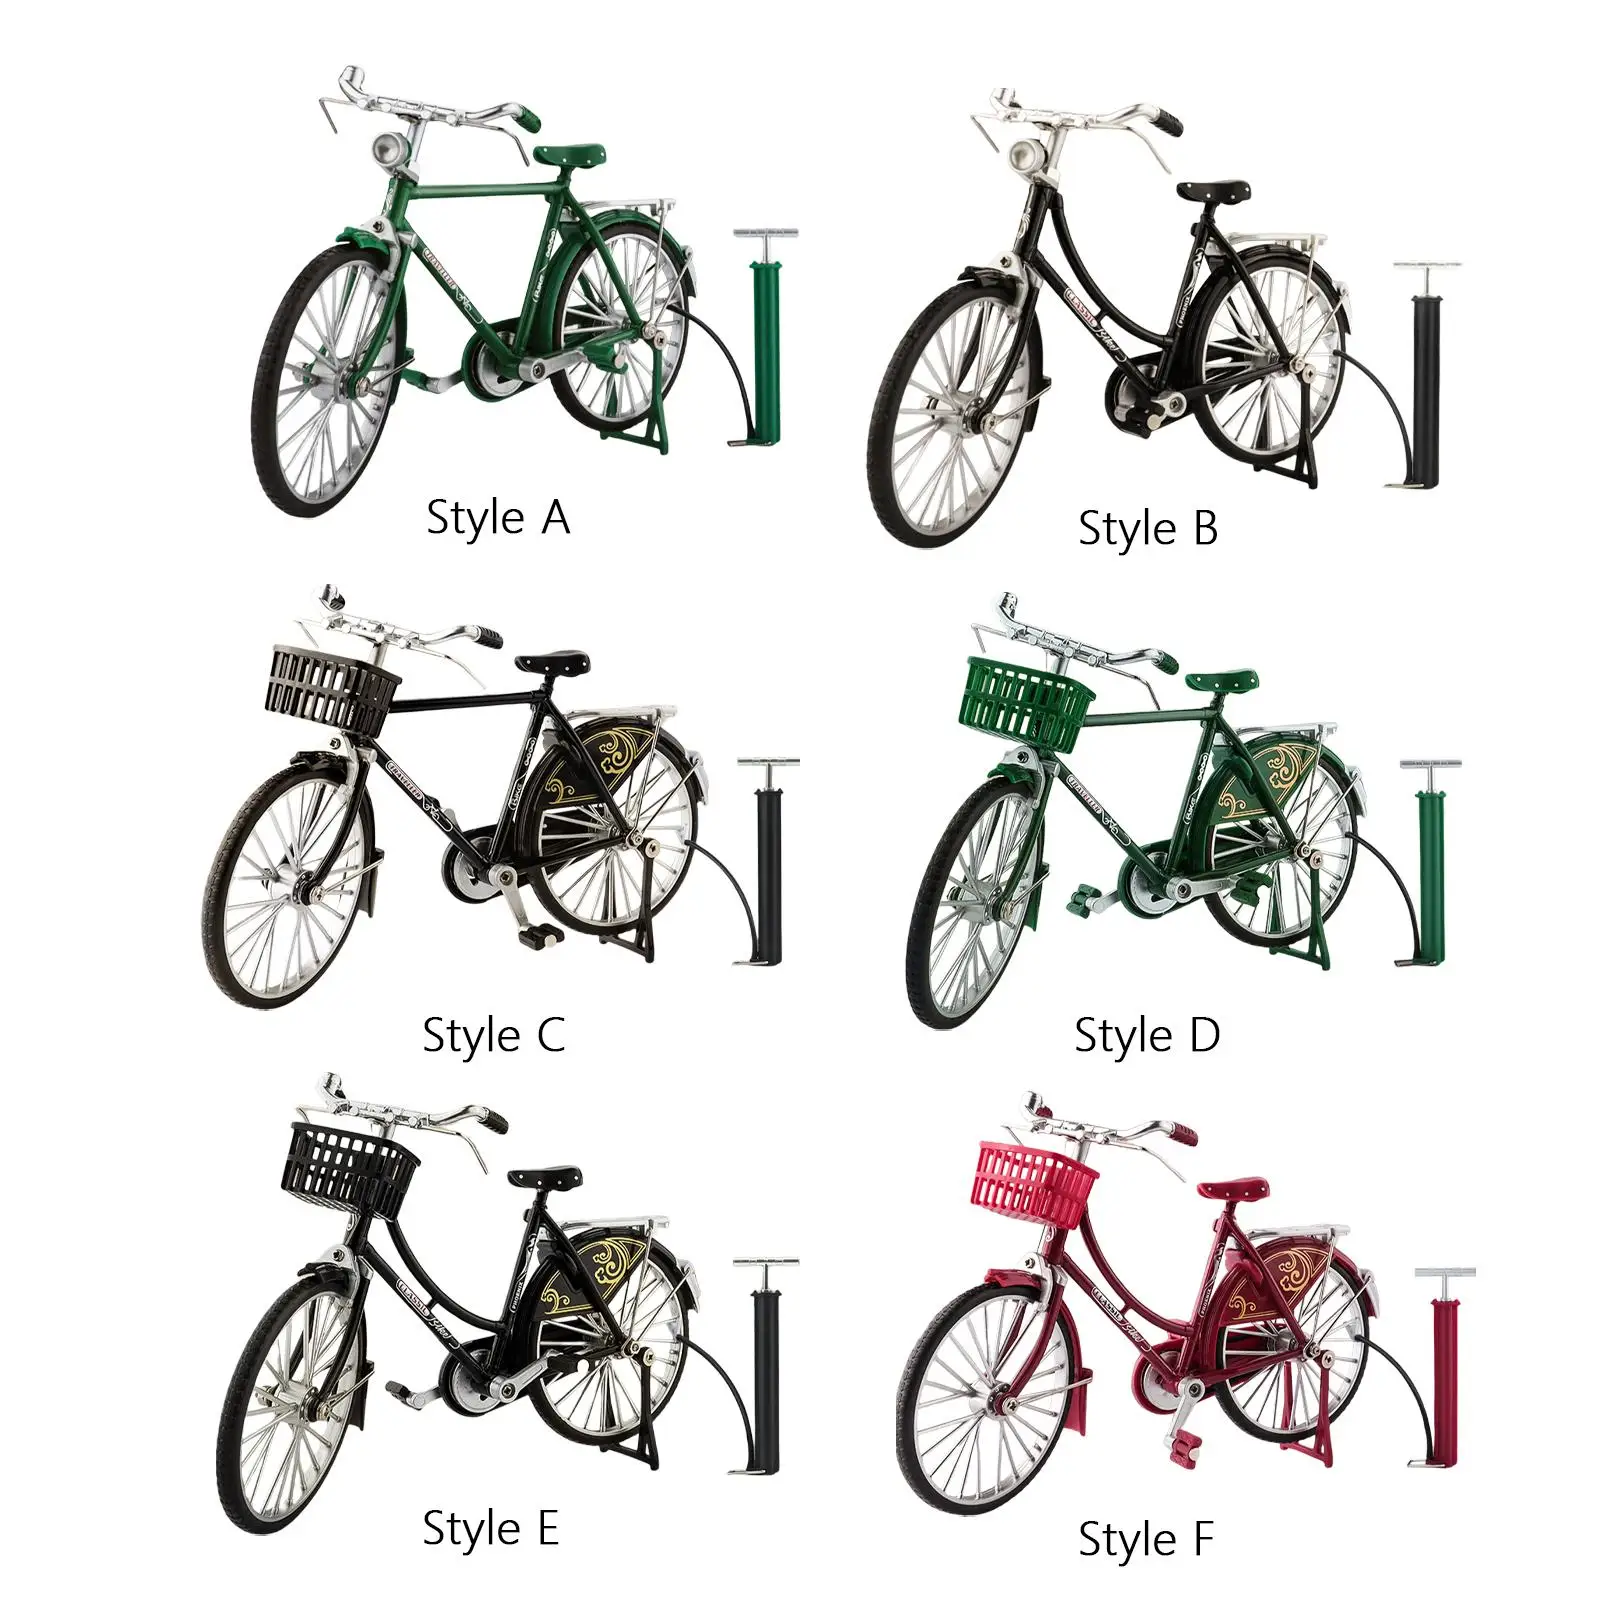 1:10 Bicycle Model Collections Figurines Diecast Mini Bicycle Vintage Bicycle Model Ornament for Home Bedroom Office Girls Decor